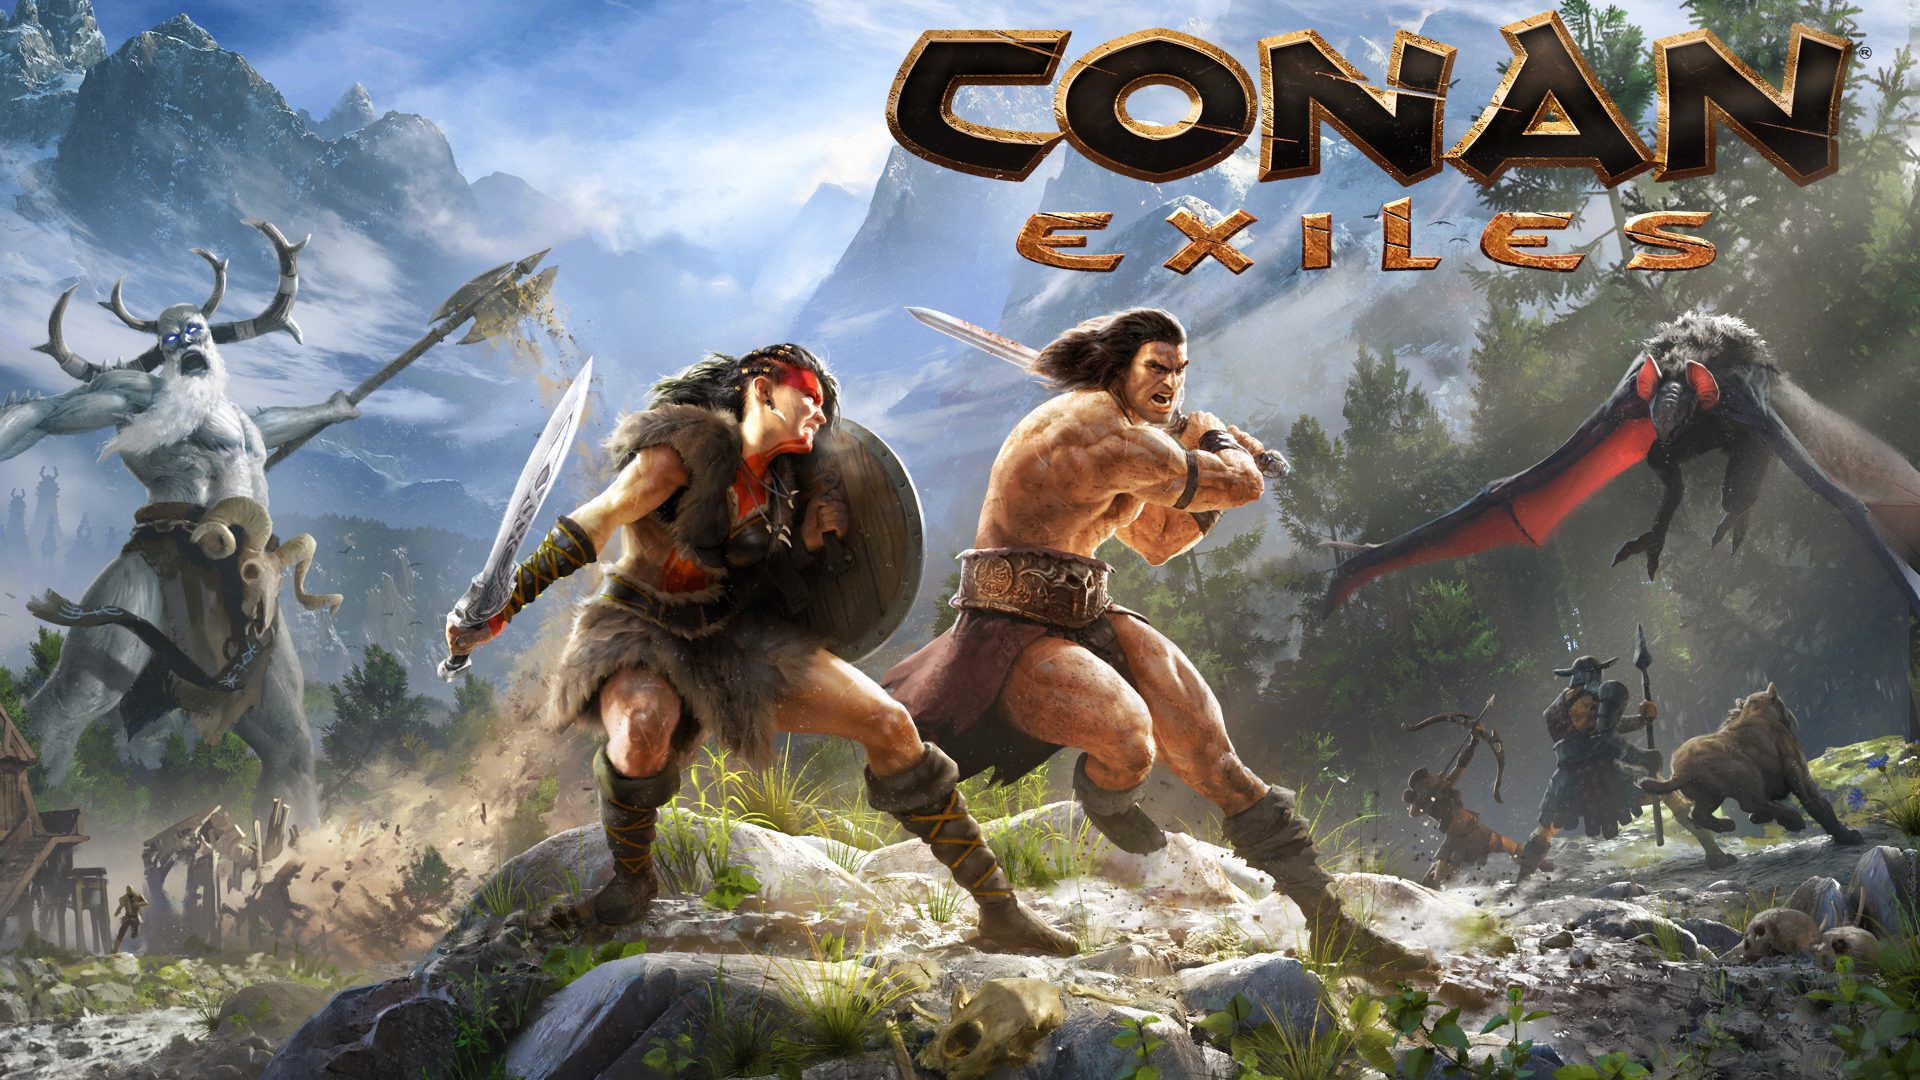 Play Conan Exiles FREE on Steam this weekend